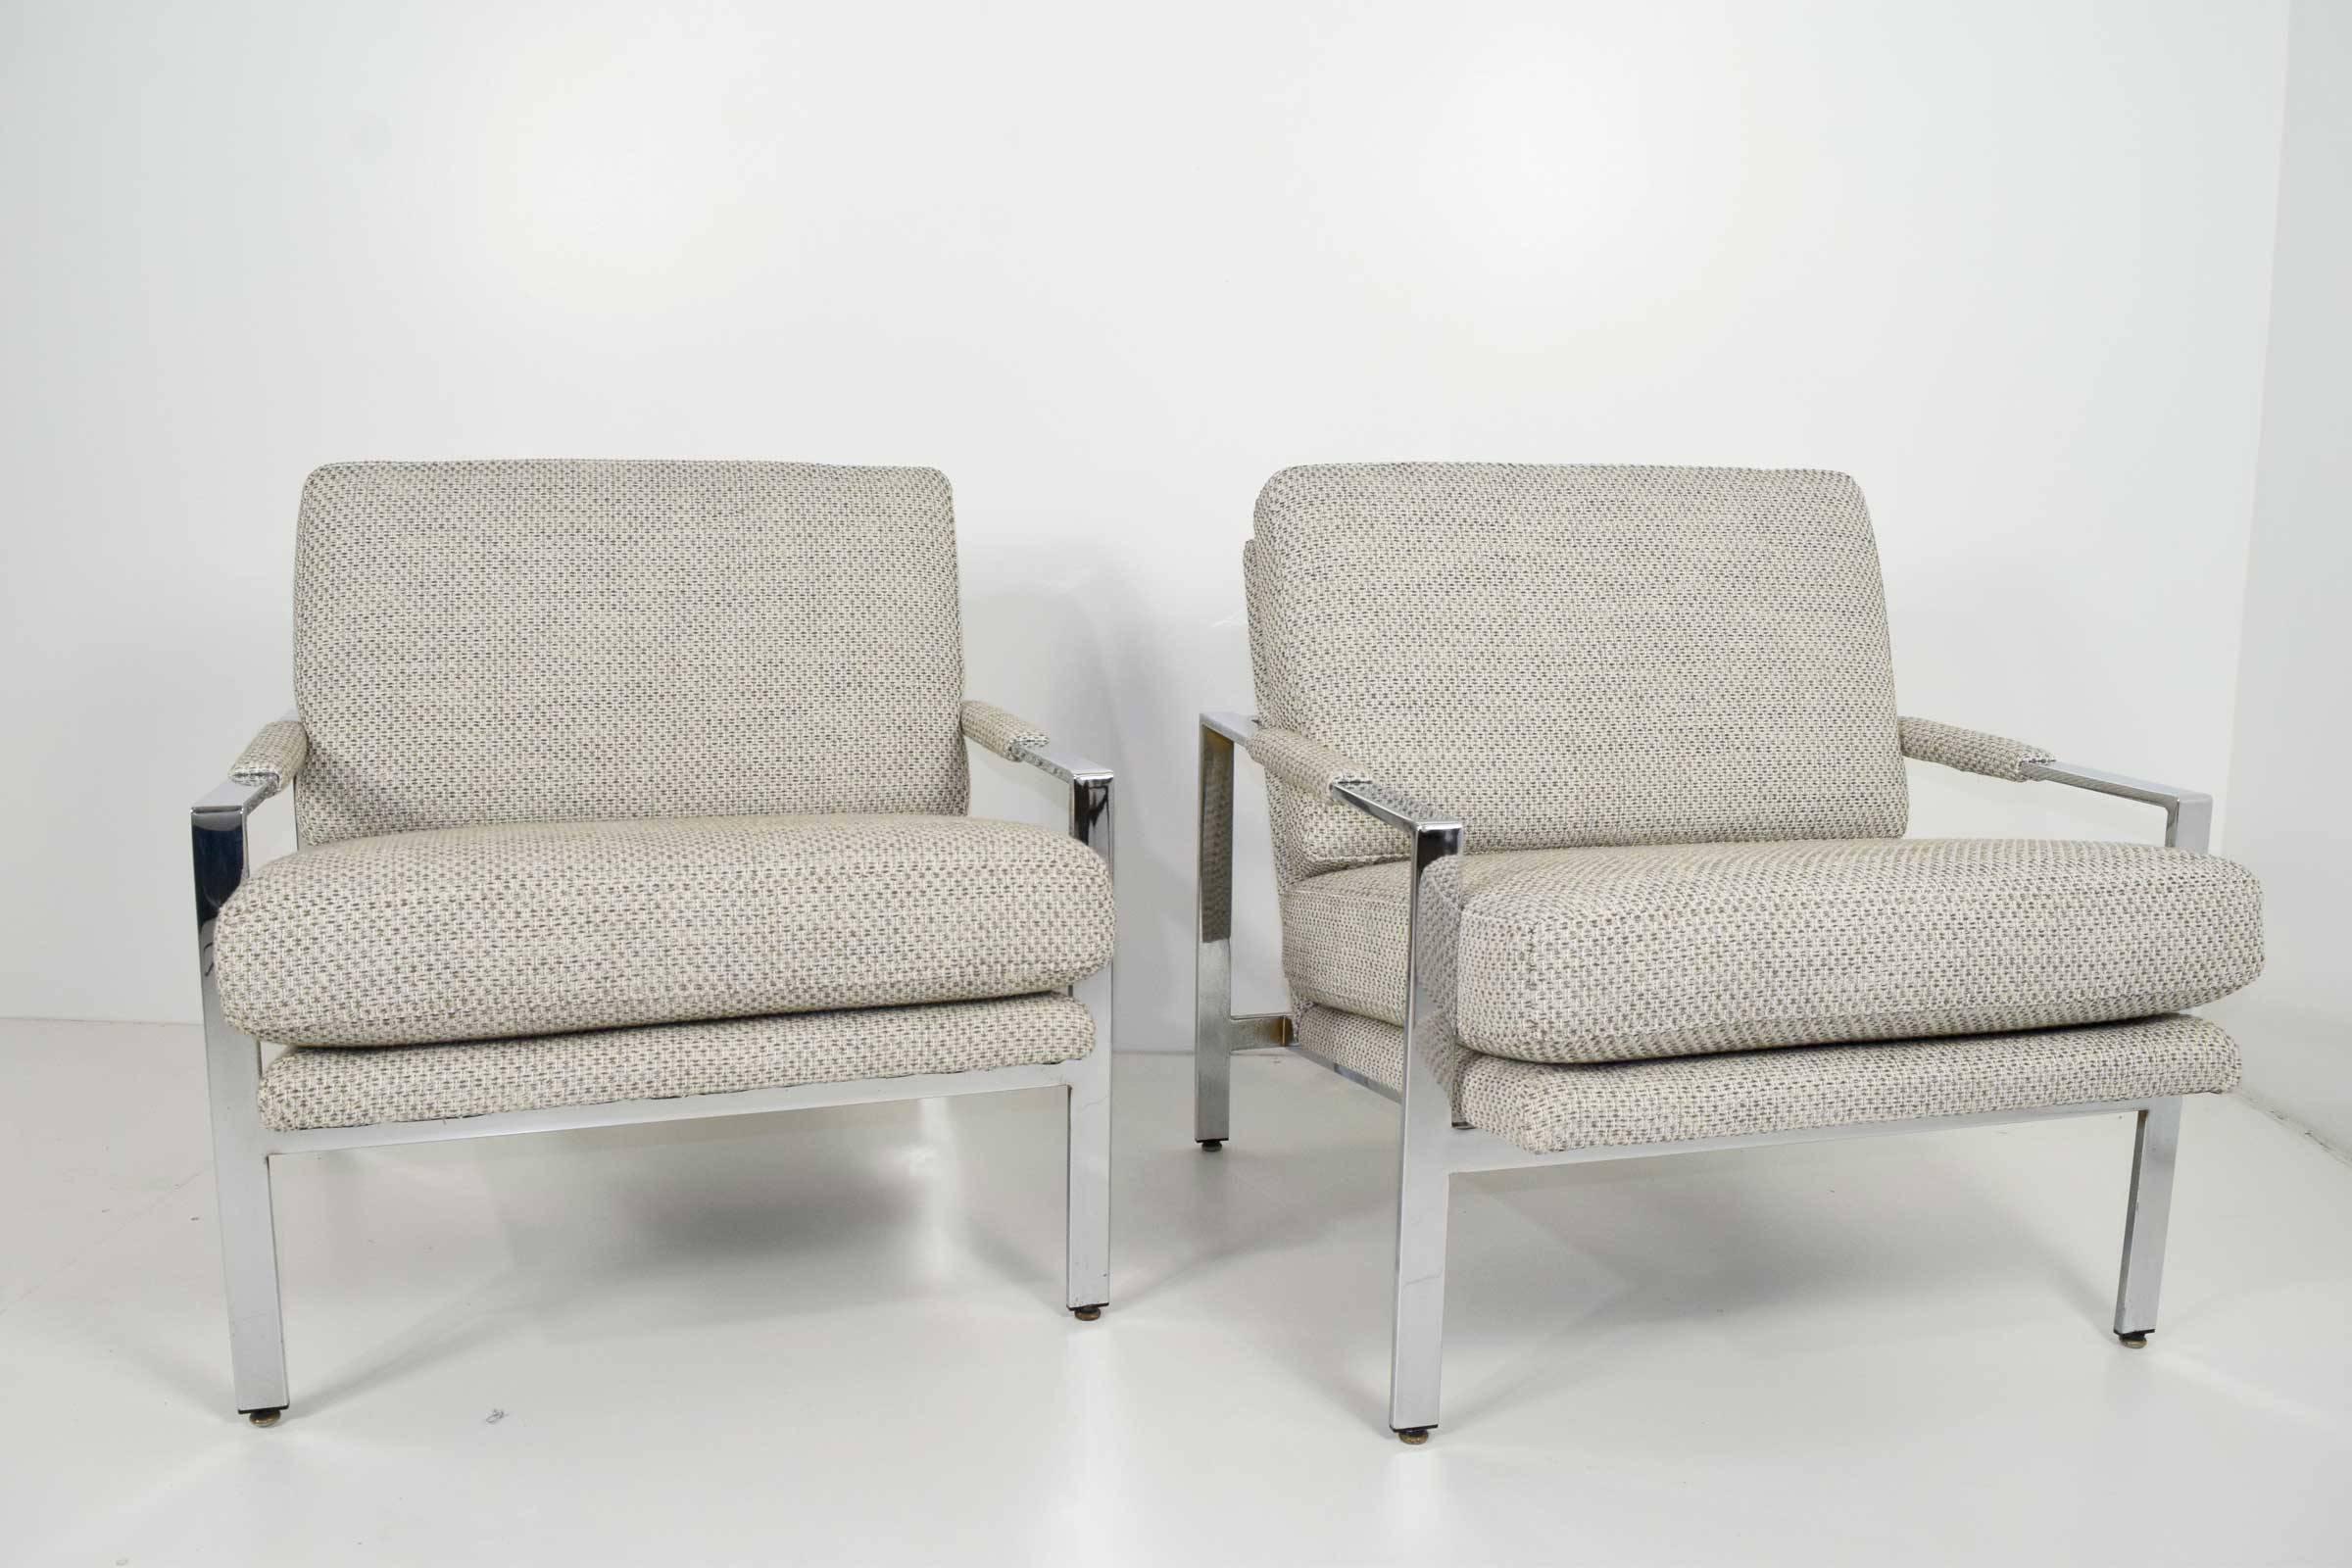 American Milo Baughman Chrome Frame Lounge Chairs in Neutral Color New Upholstery